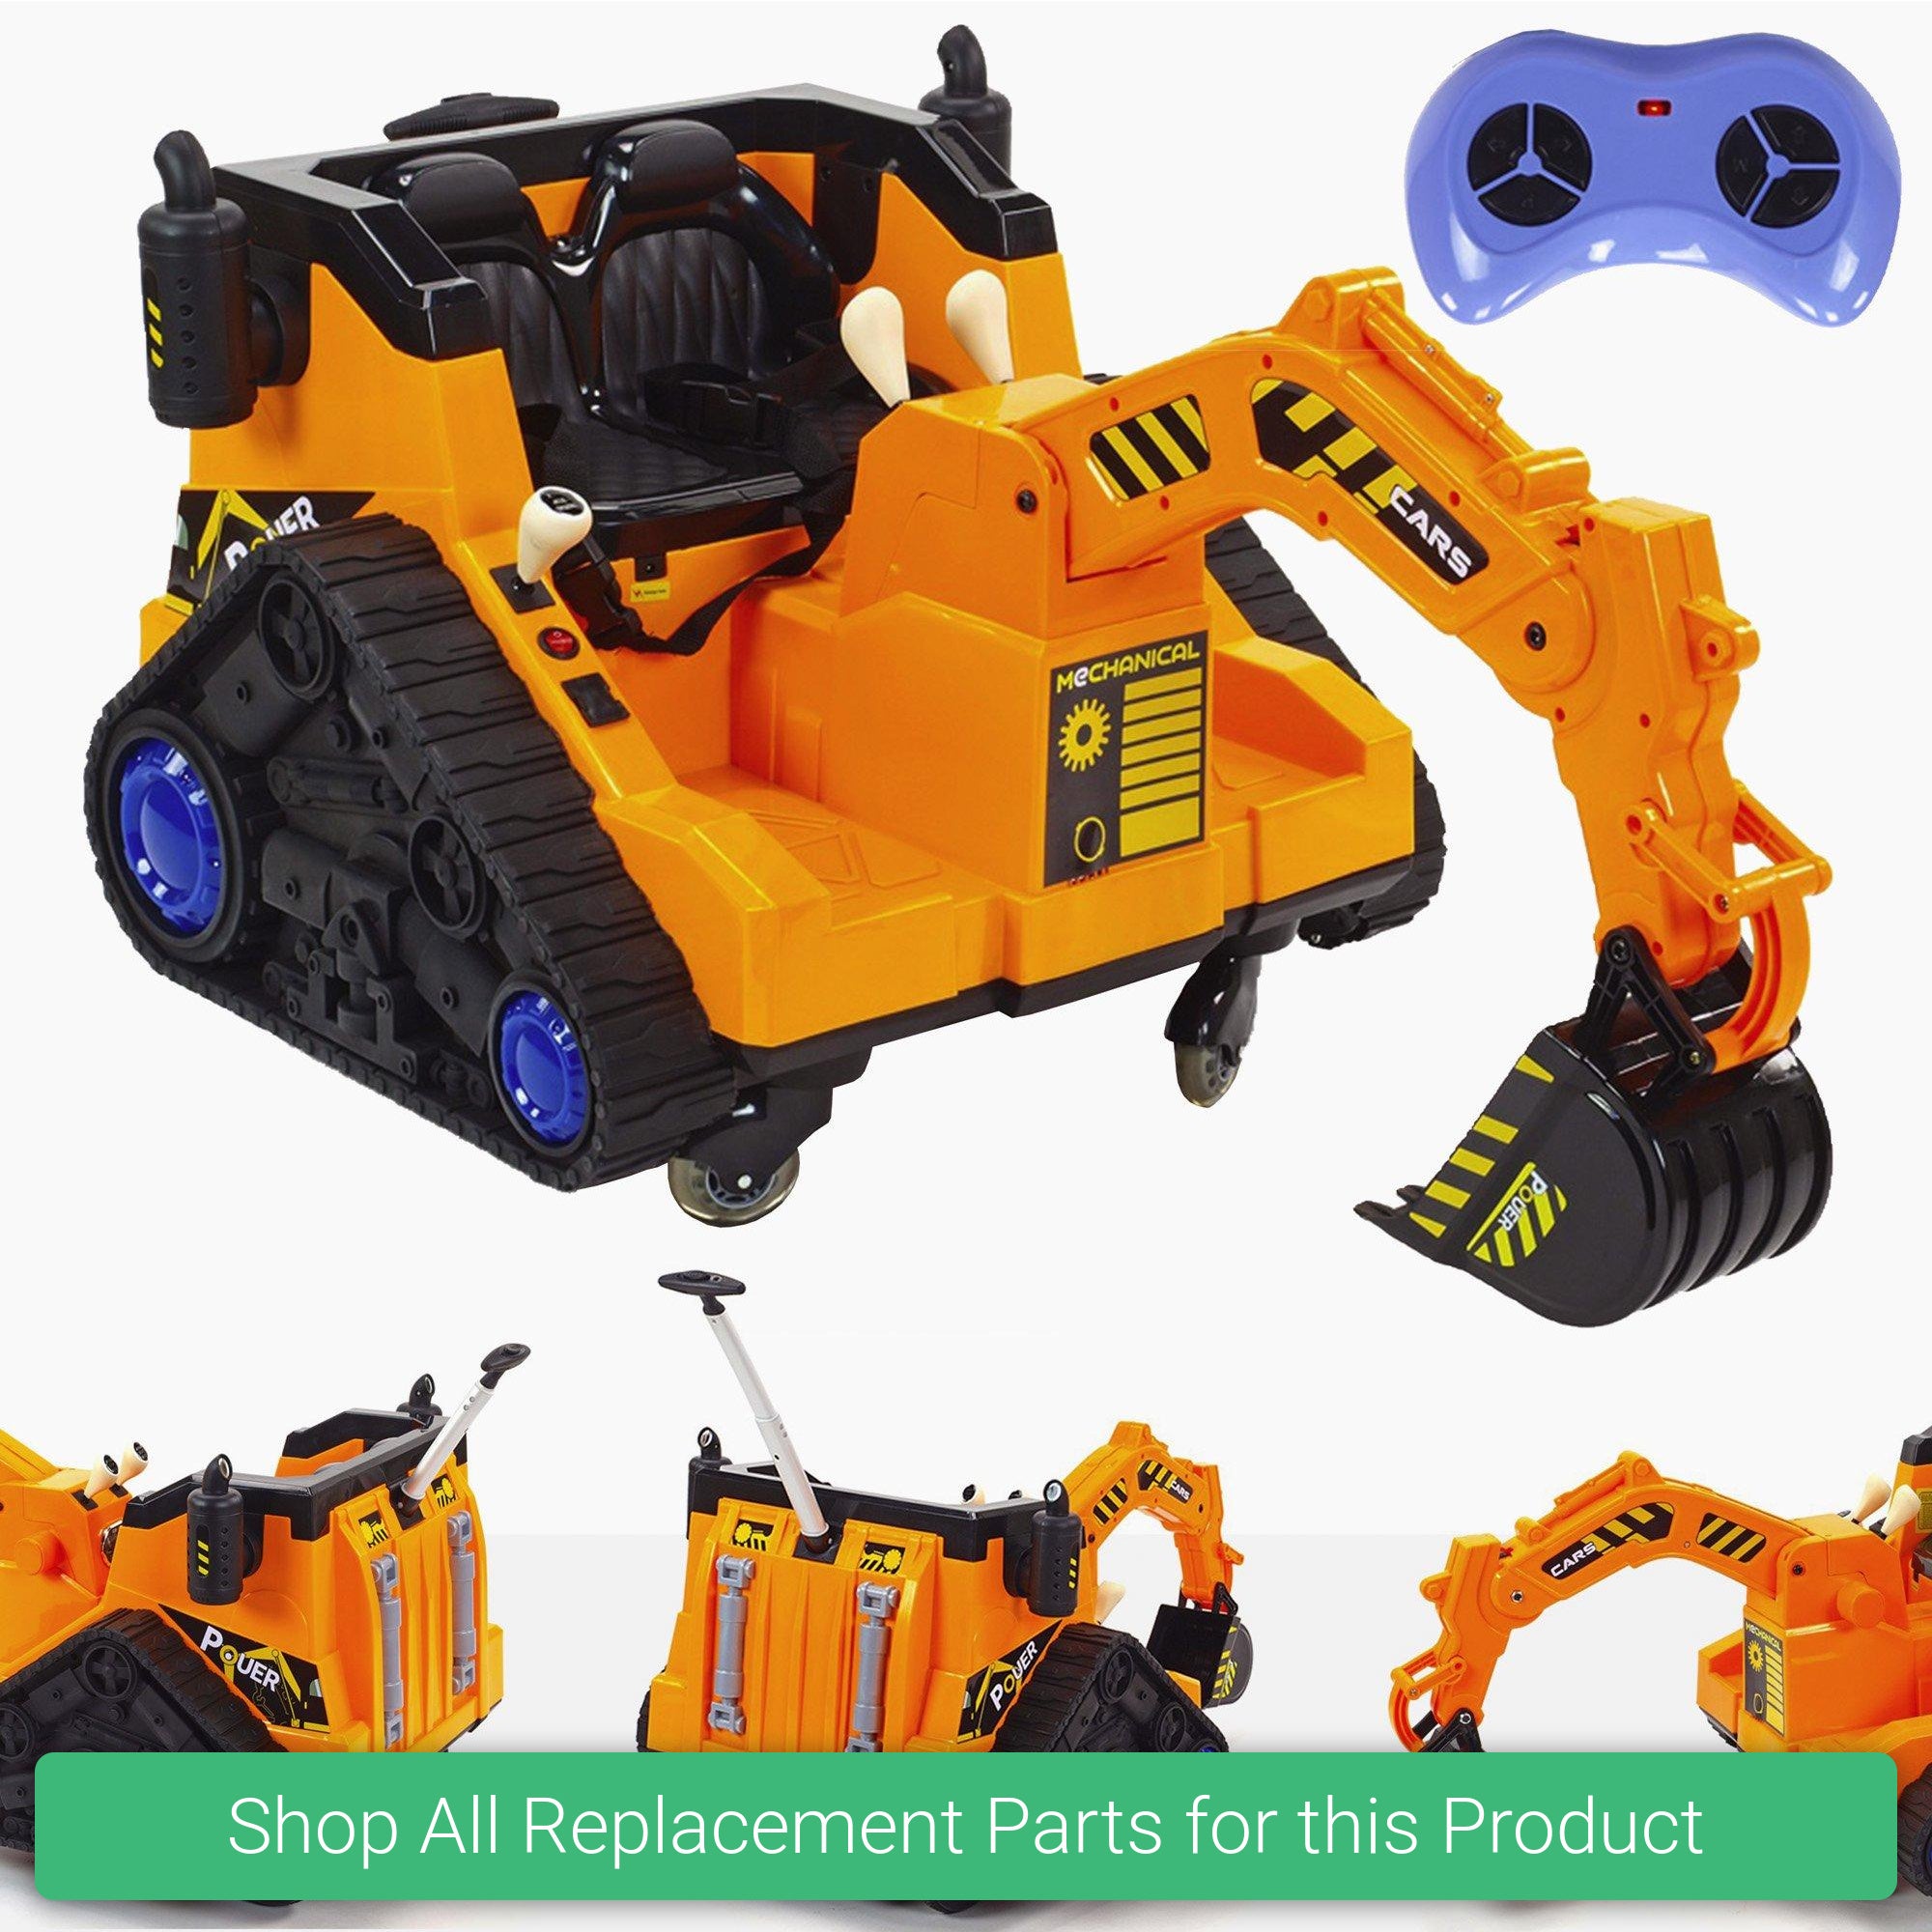 Replacement Parts and Spares for Kids 12v Electric Digger - DIG-YEL - FL858